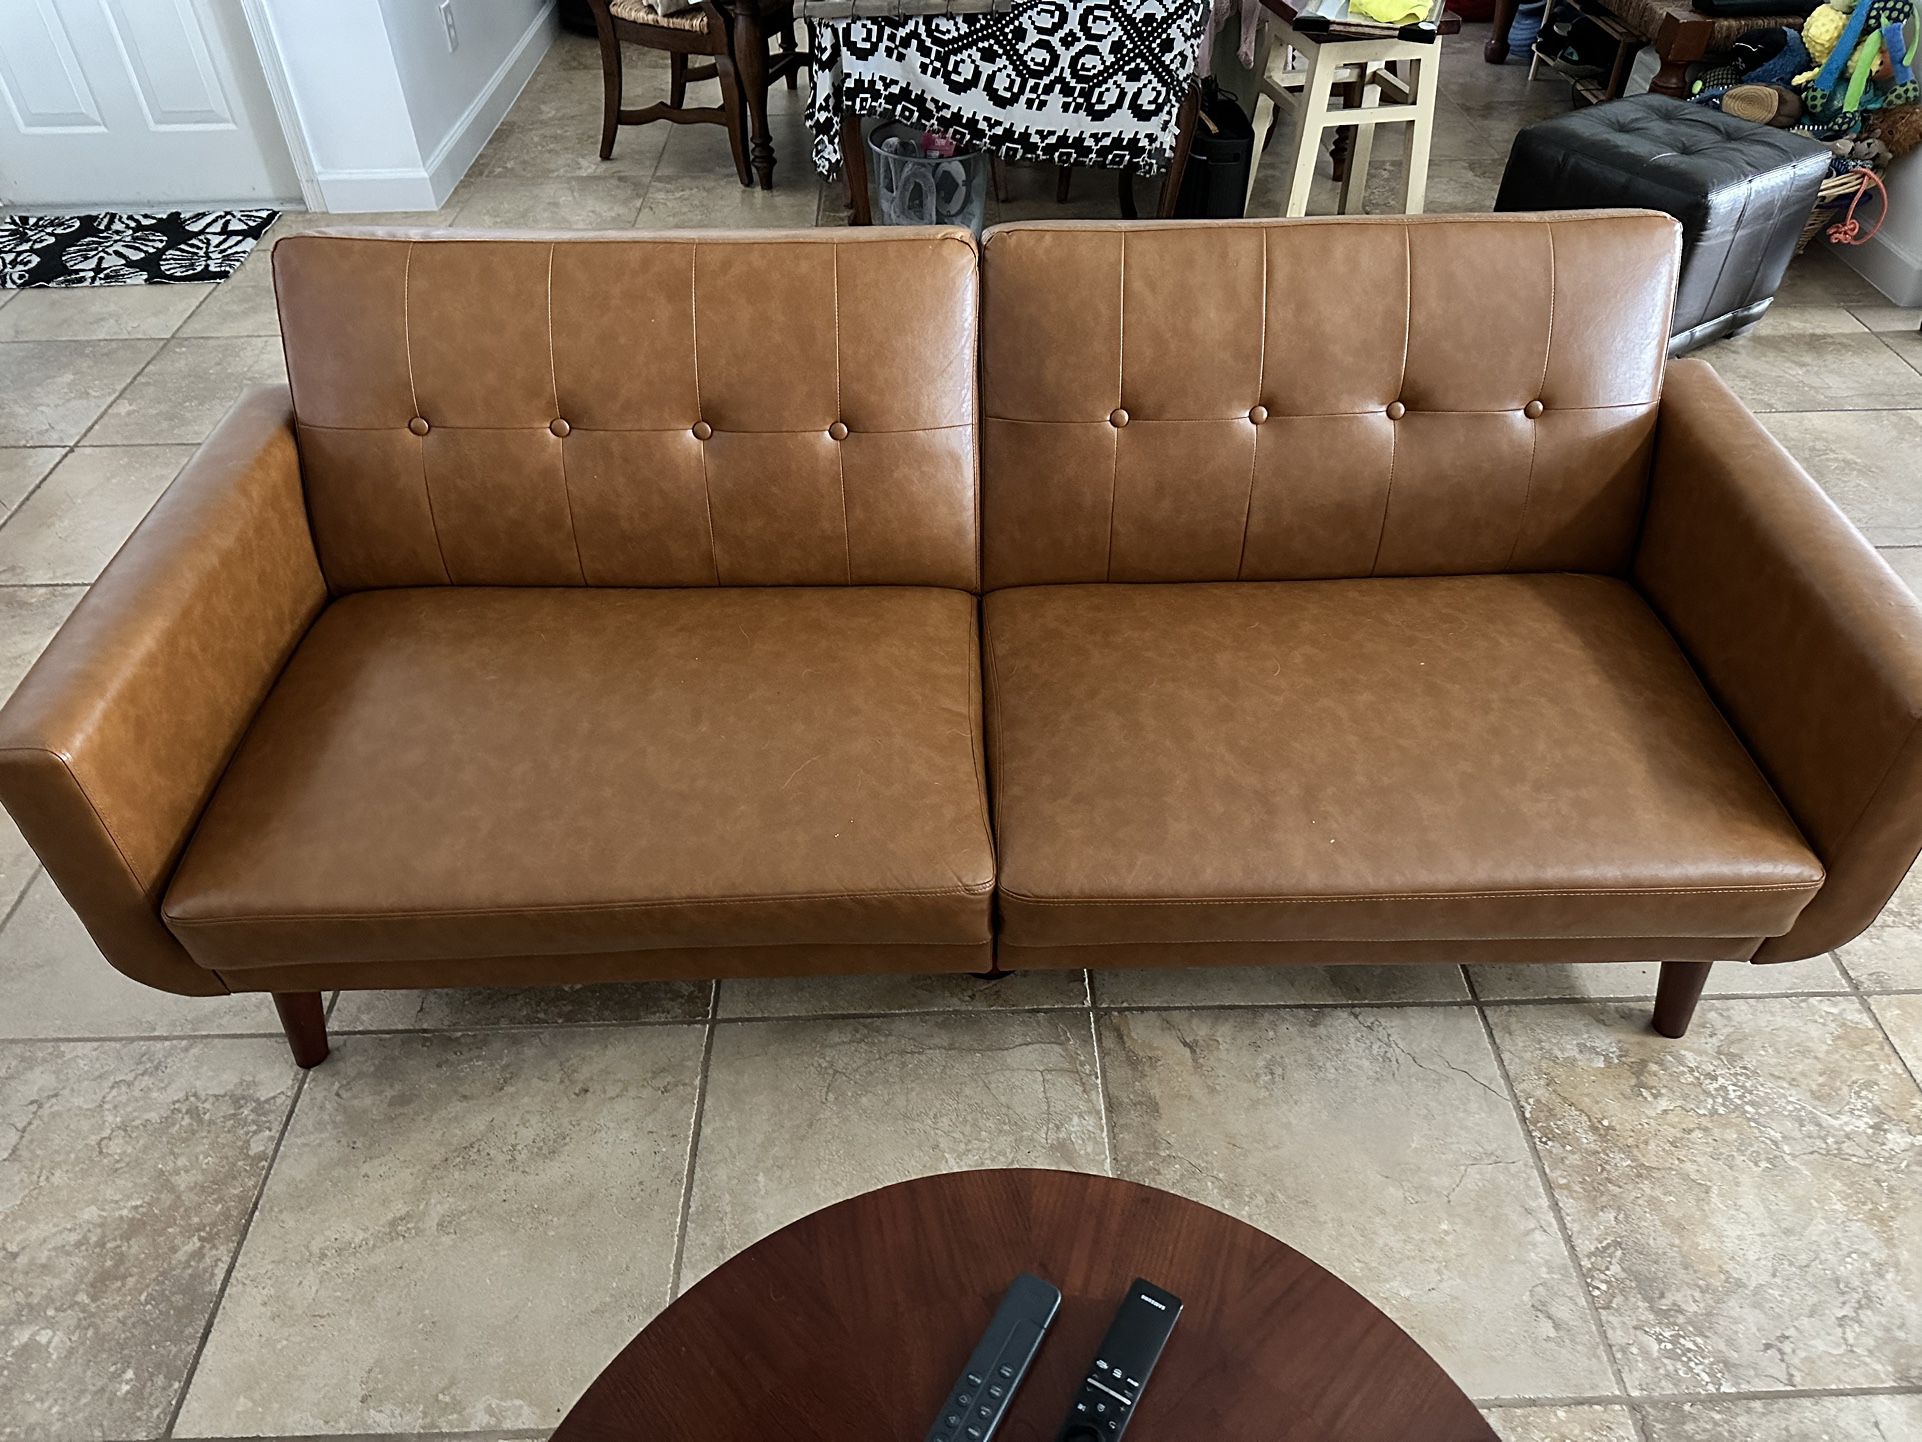 Nola Sofa Bed (camel Faux Leather ) Futon Willing To Negotiate :)